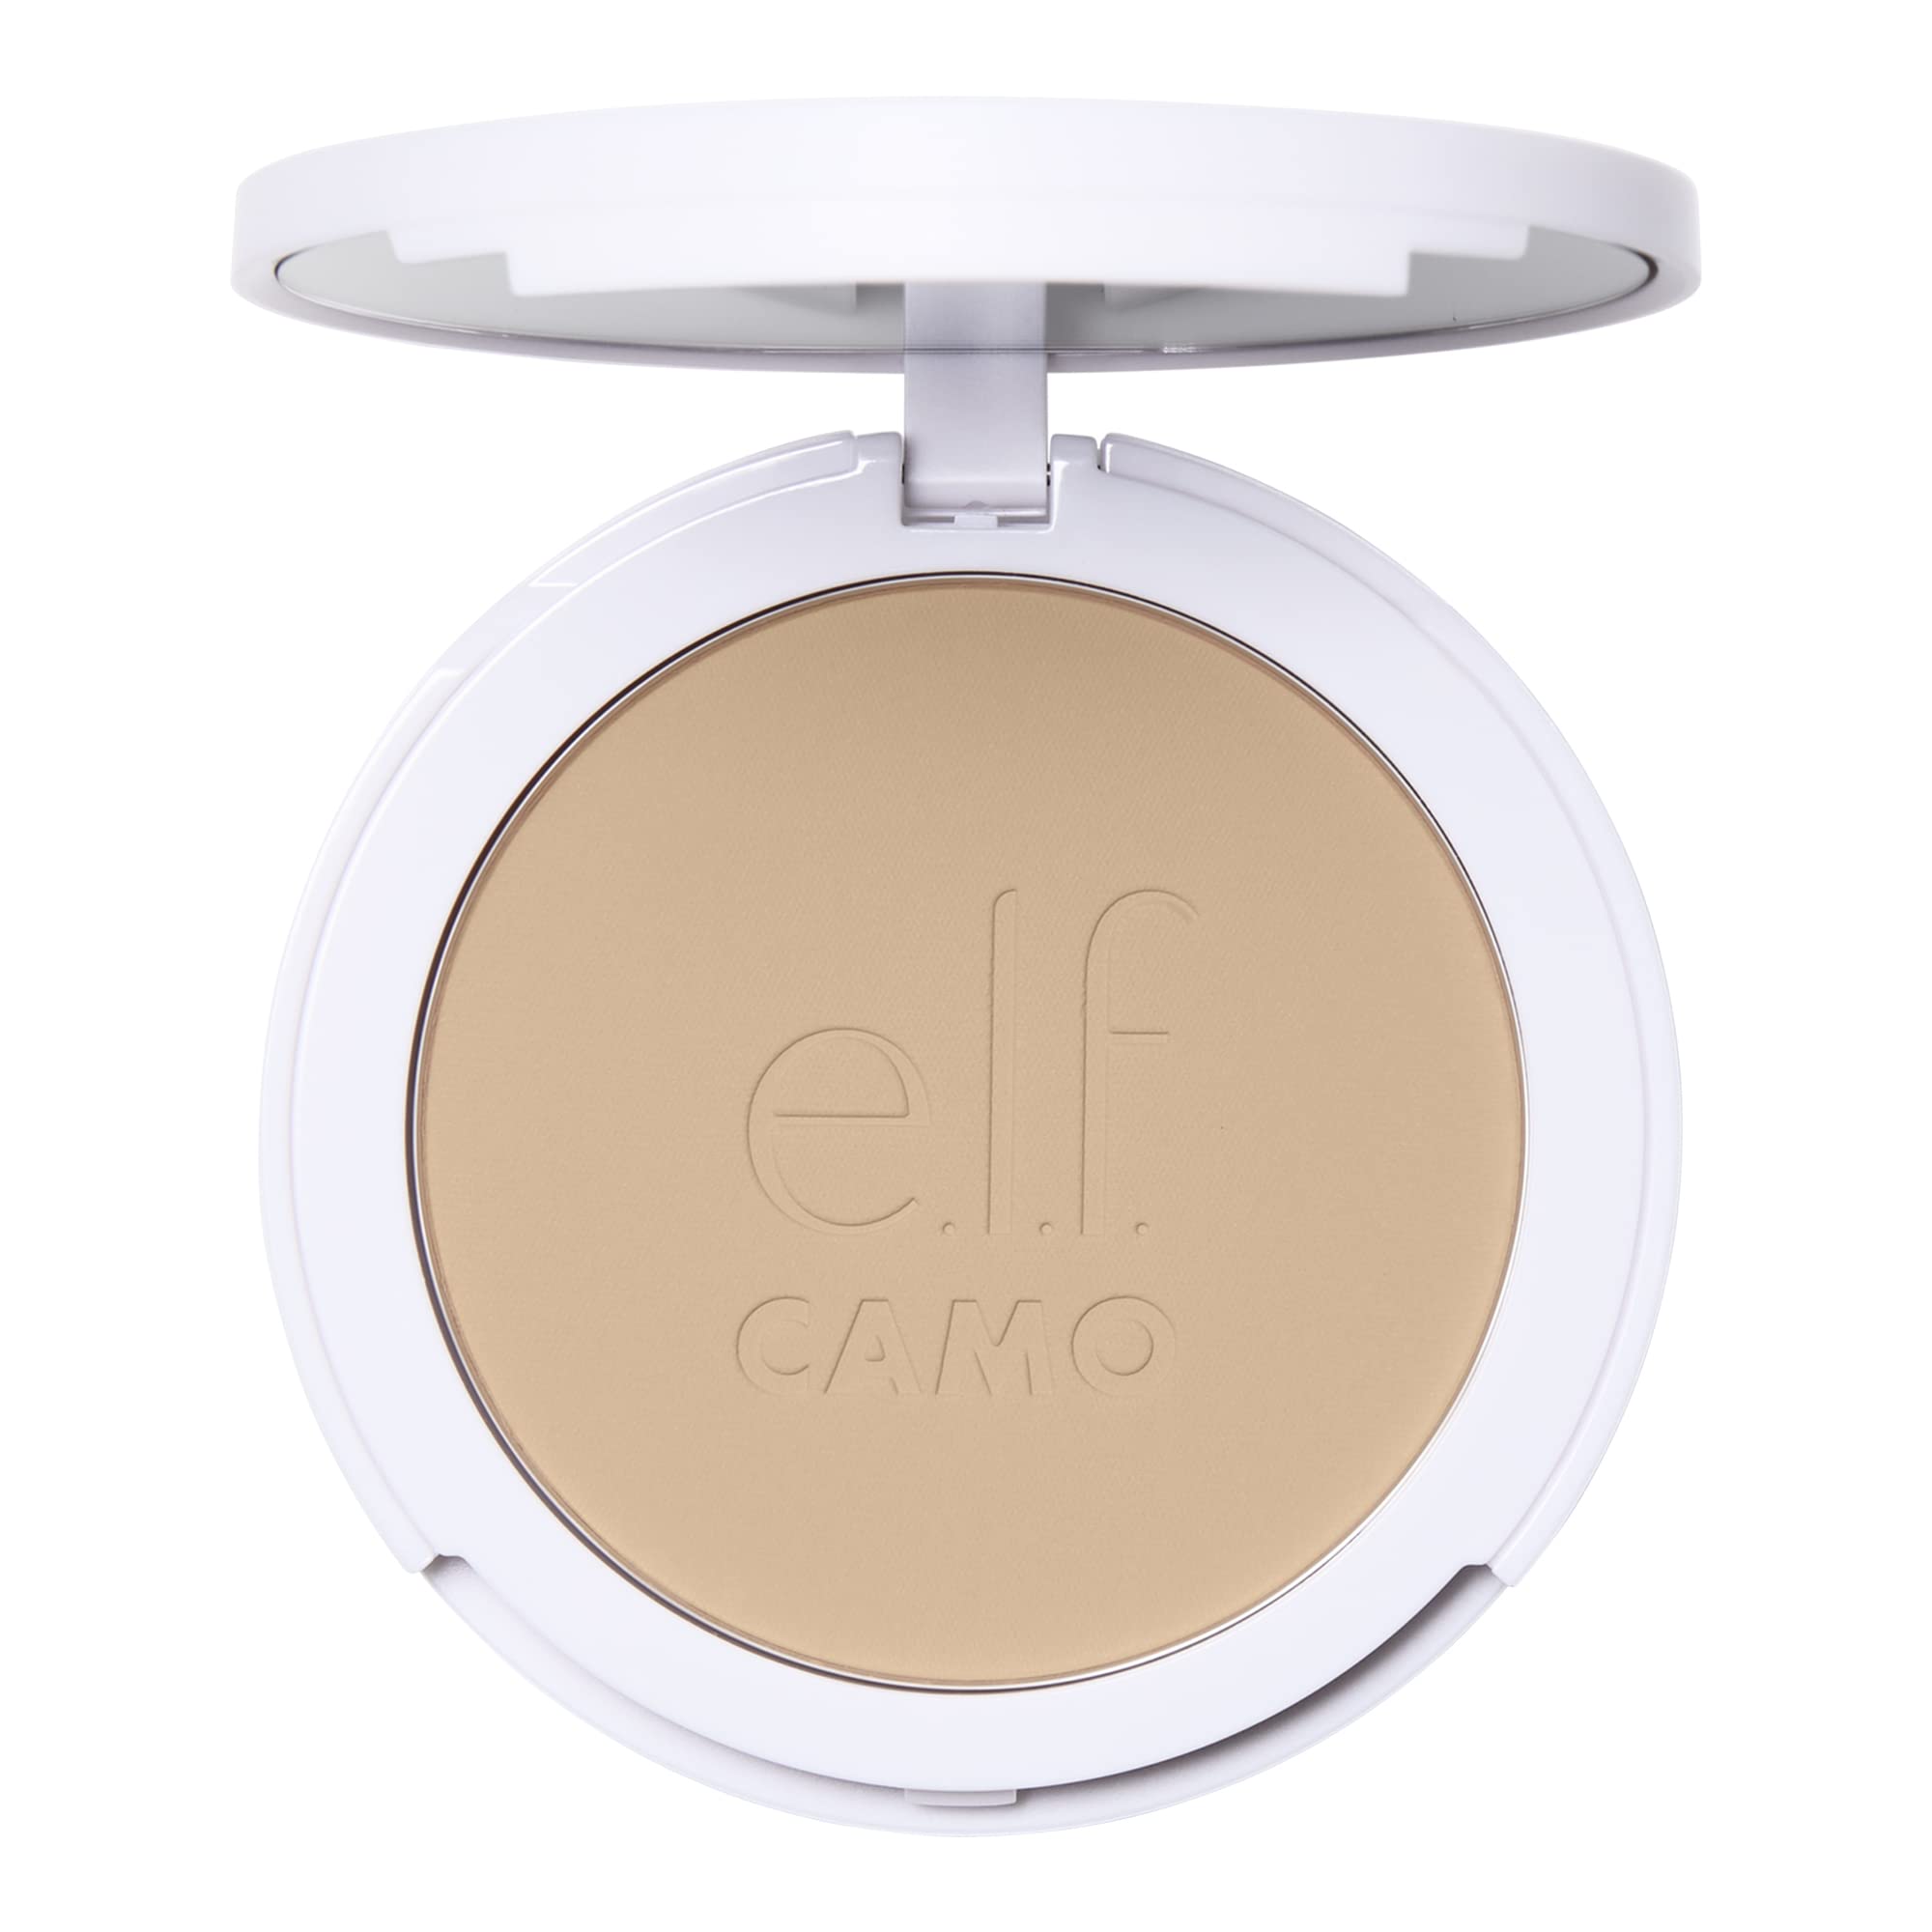 e.l.f. Camo Powder Foundation, Lightweight, Primer-Infused Buildable & Long-Lasting Medium-to-Full Coverage Foundation, Light 280 N